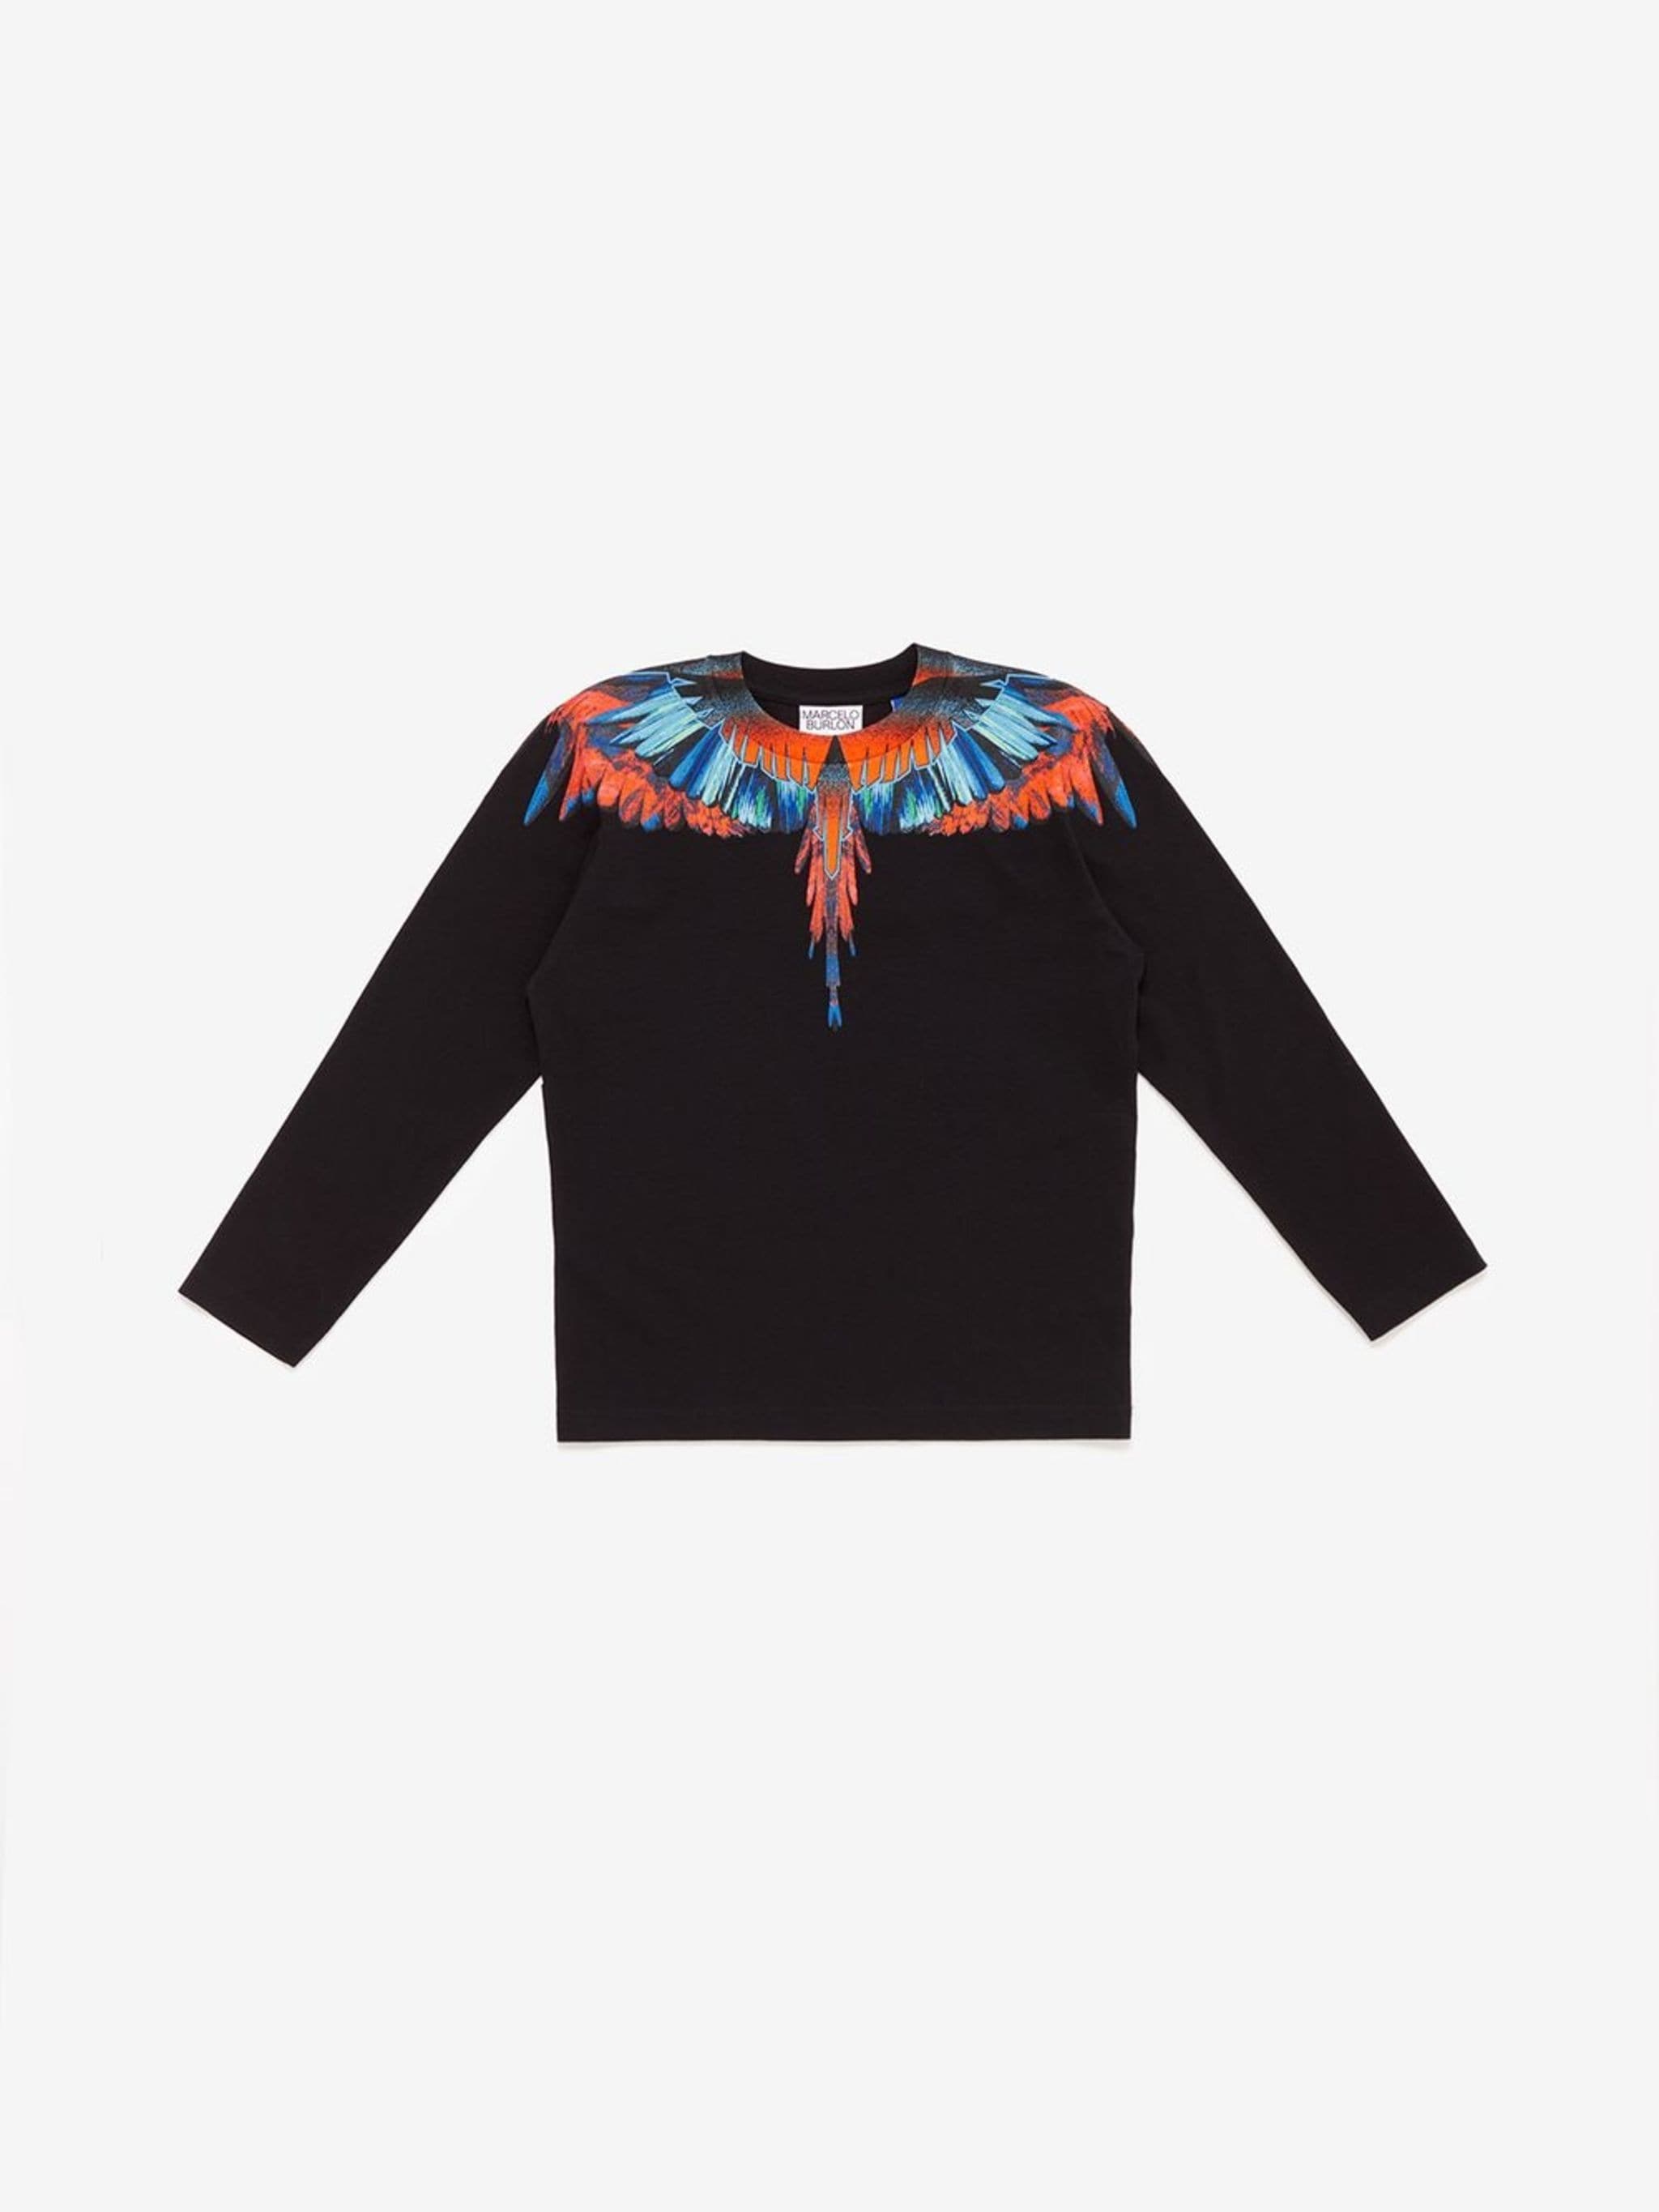 Wings print long-sleeve T-shirt from Marcelo Burlon Kids featuring black/multicolour, cotton, signature Marcelo Burlon Wings print, long sleeves and round neck.